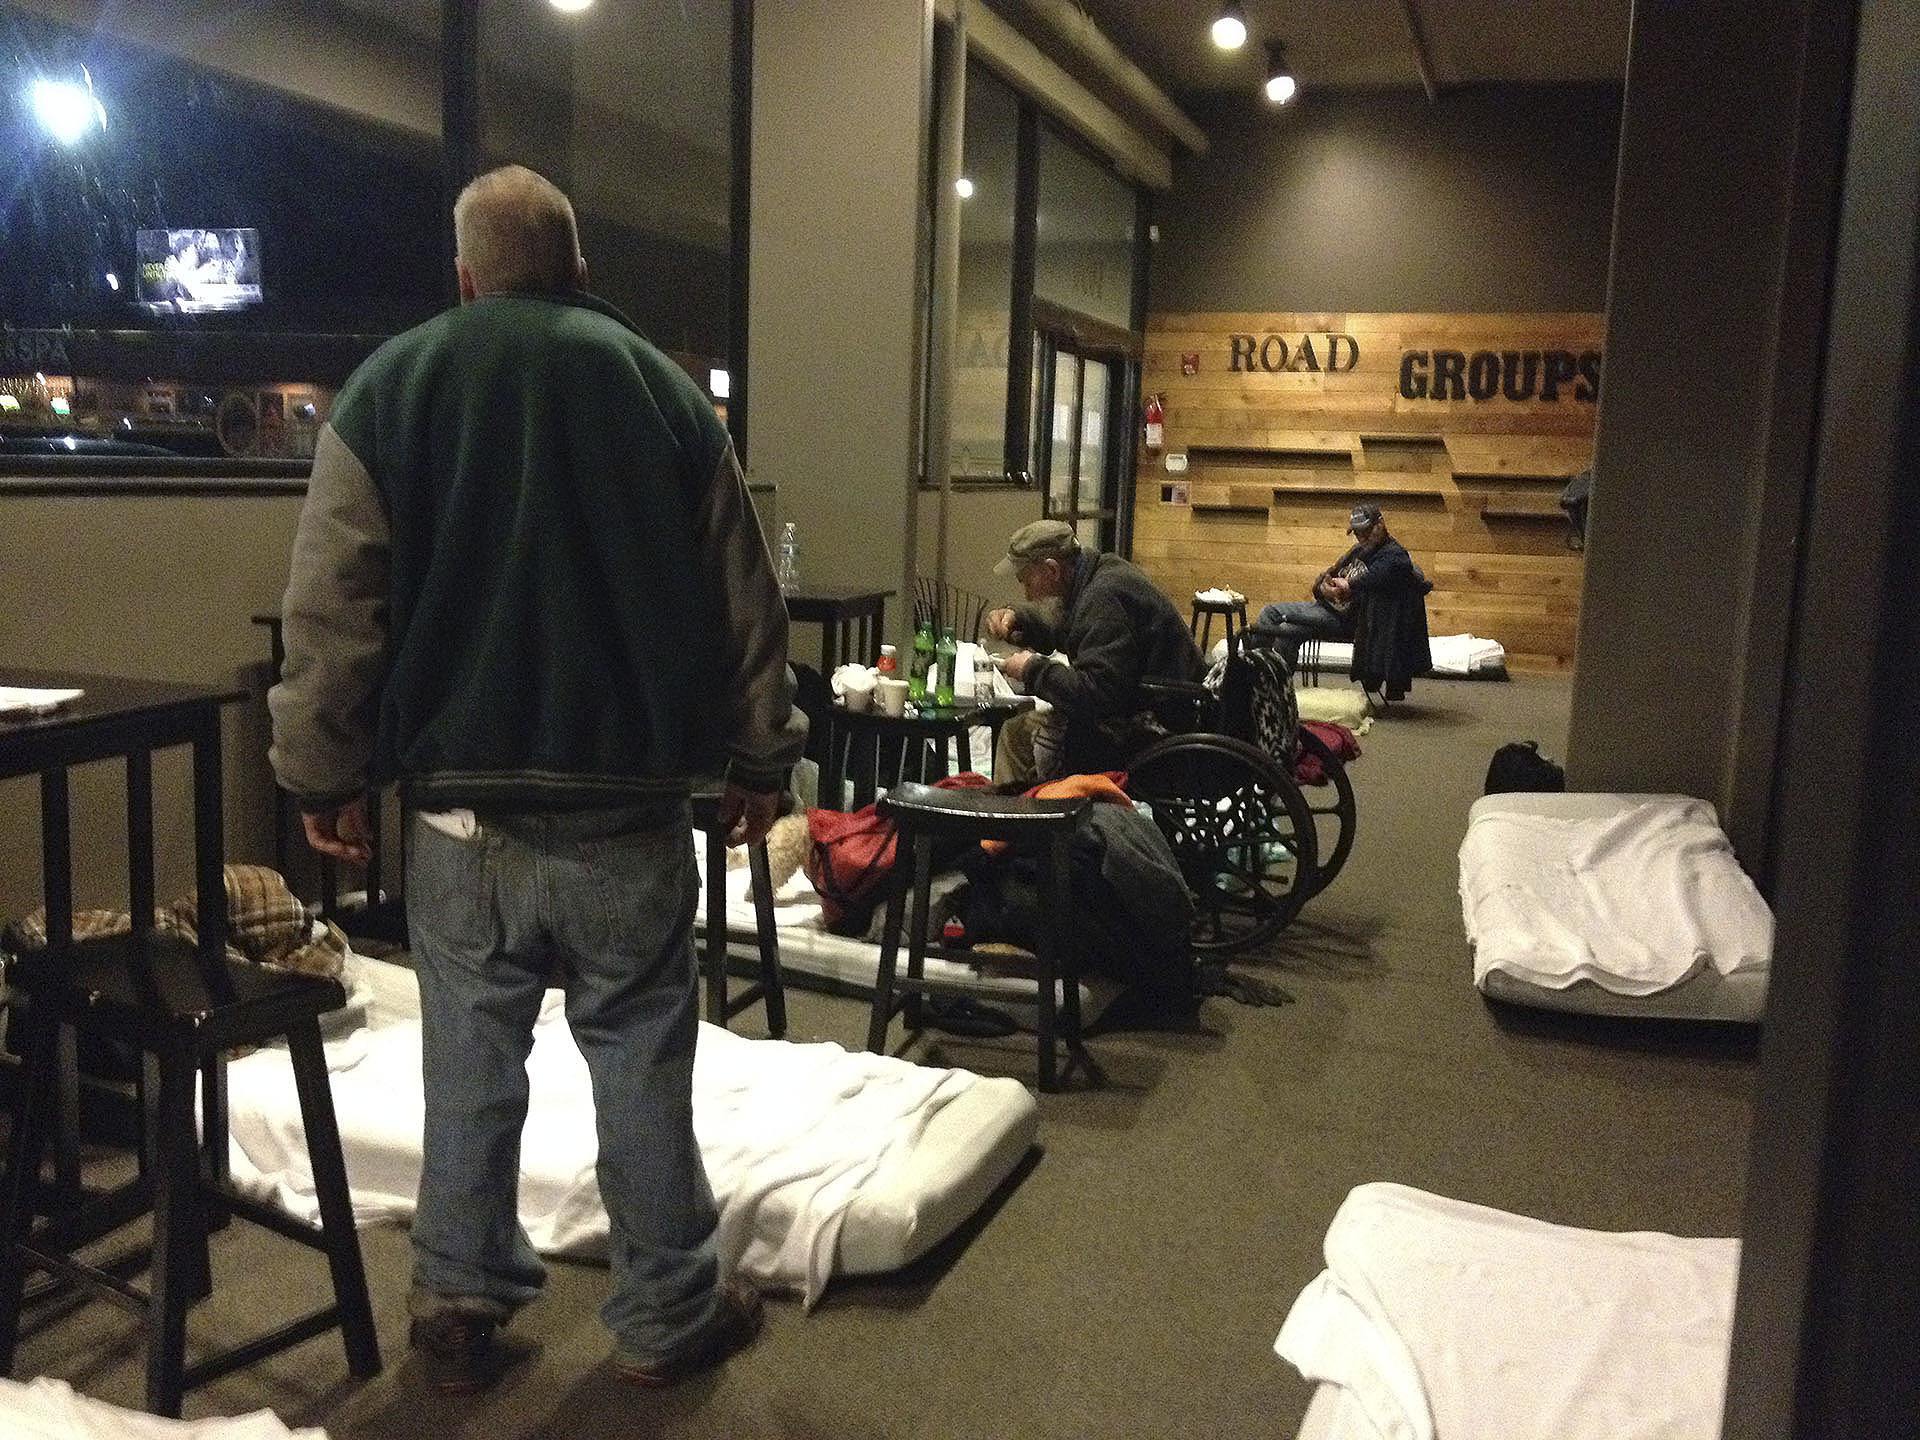 One night in Marysville’s emergency cold weather shelter